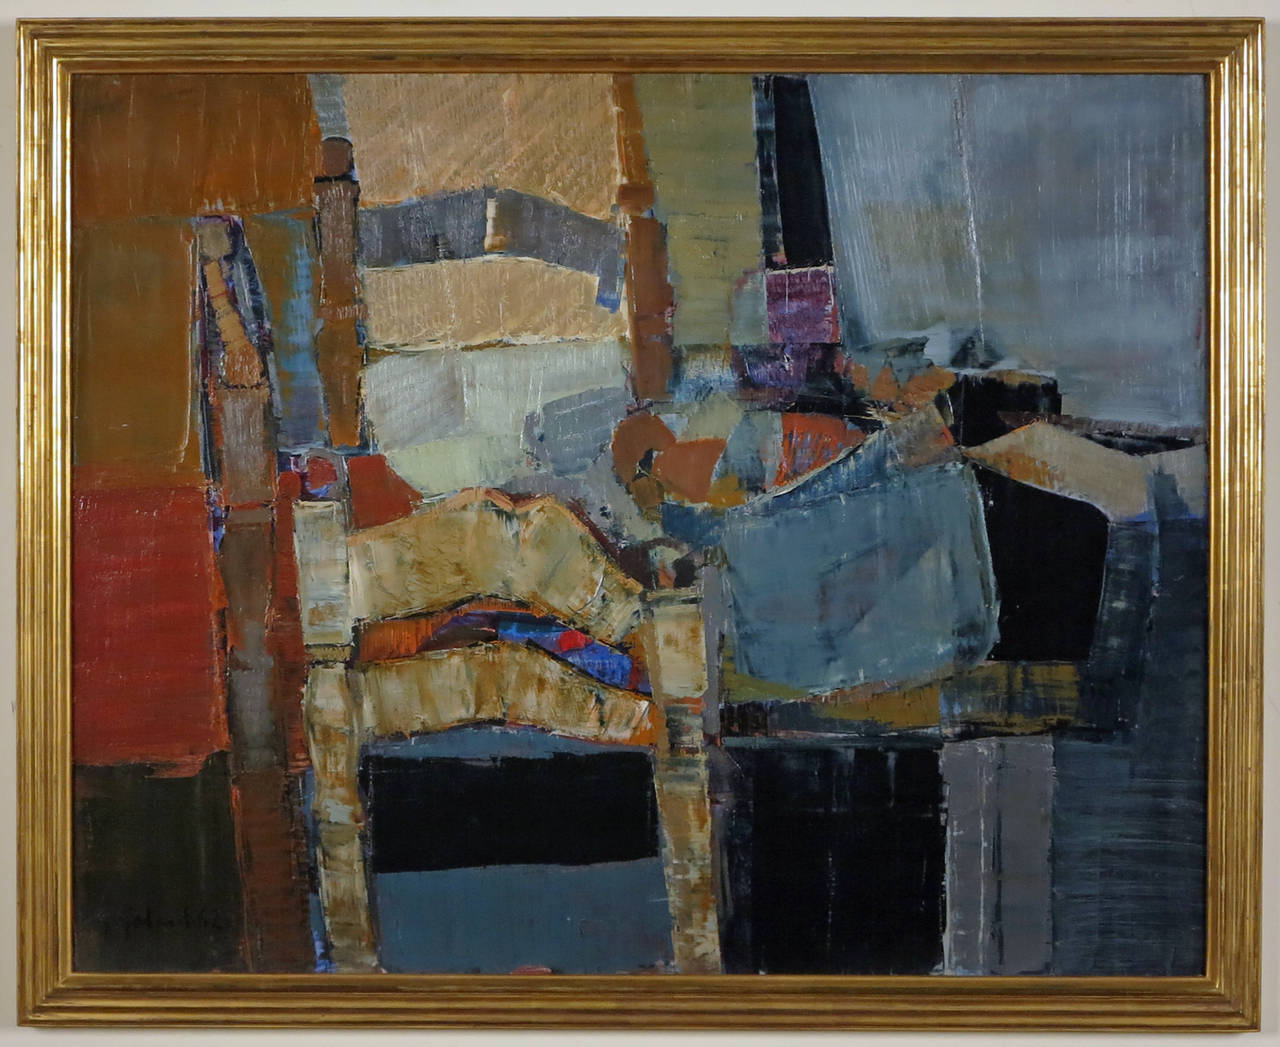 Gabriel Godard.
French, born 1933.
Aux Chaise.

Oil on canvas:
29 by 36 in. with frame 33 by 40 in.
Signed lower left and dated 62.

Gabriel Godard was born on April 28, 1933 in Delouze in Lorraine. He started painting in 1950 with many of his